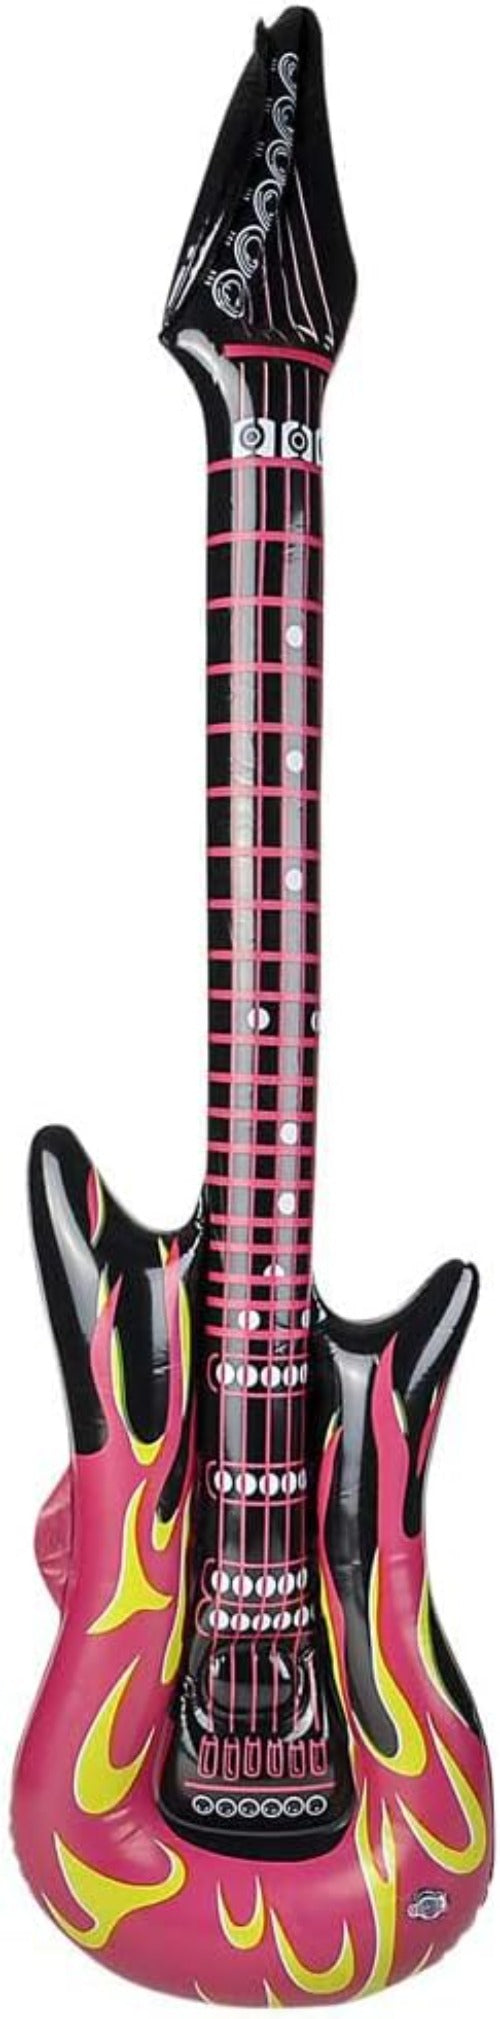 42" Inflatable Flame Guitar